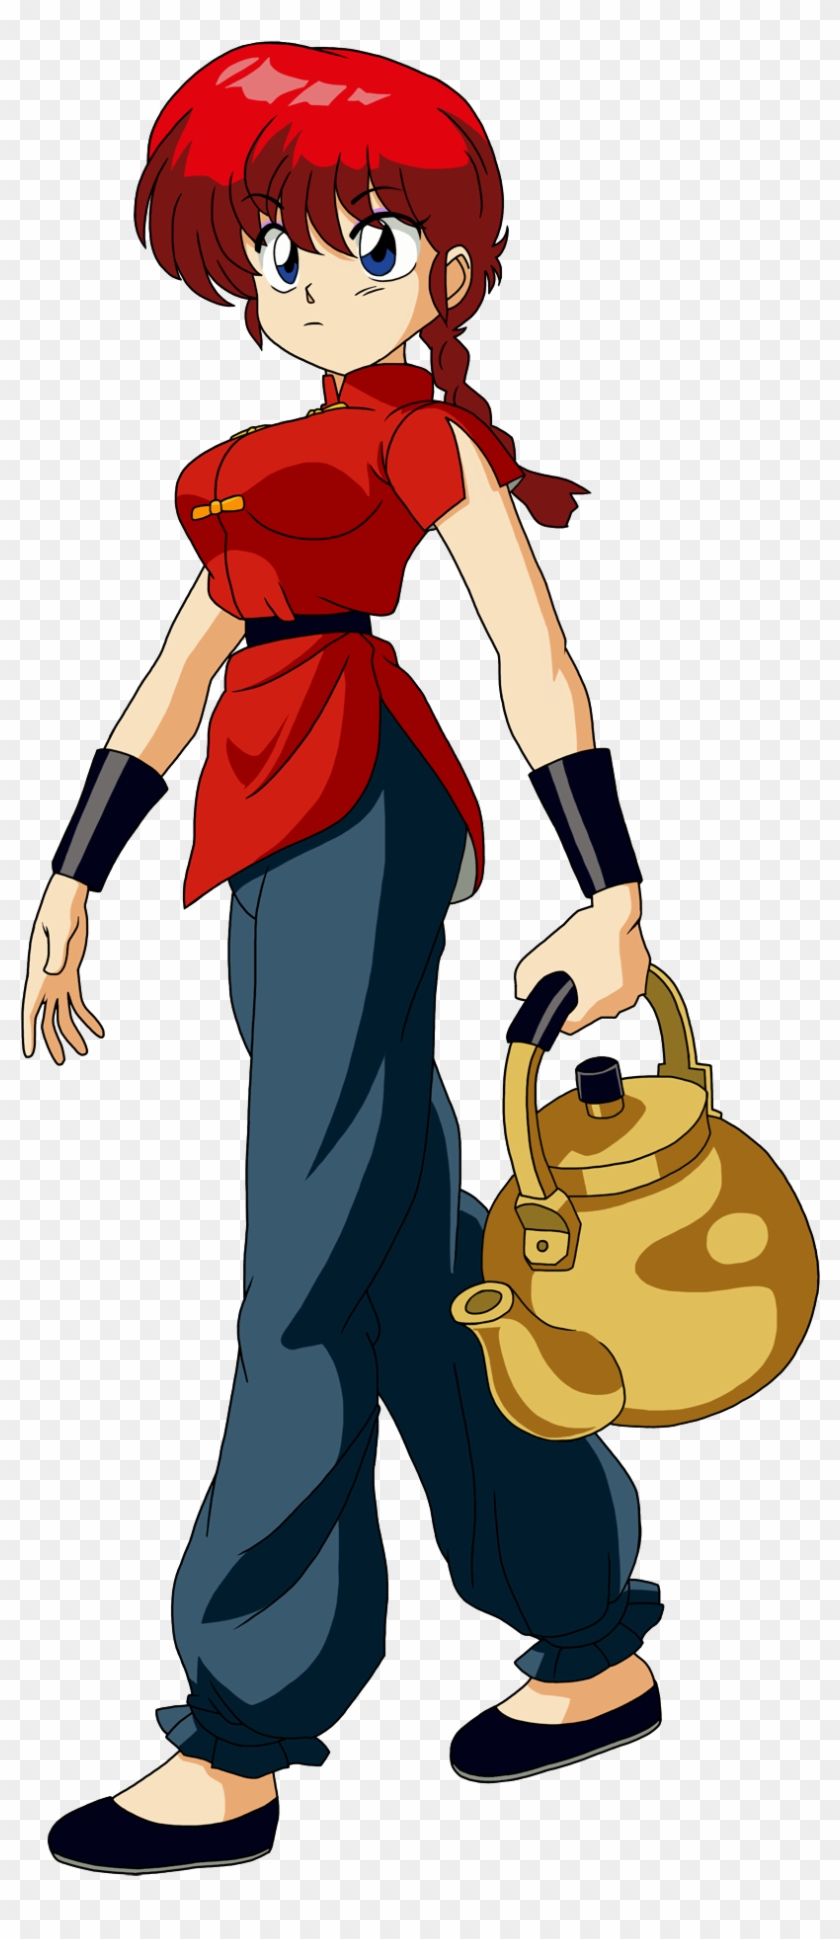 Ranma Saotome Ranma Saotome Free Transparent Png Clipart Images Download All png images can be used for personal use unless stated otherwise. ranma saotome ranma saotome free